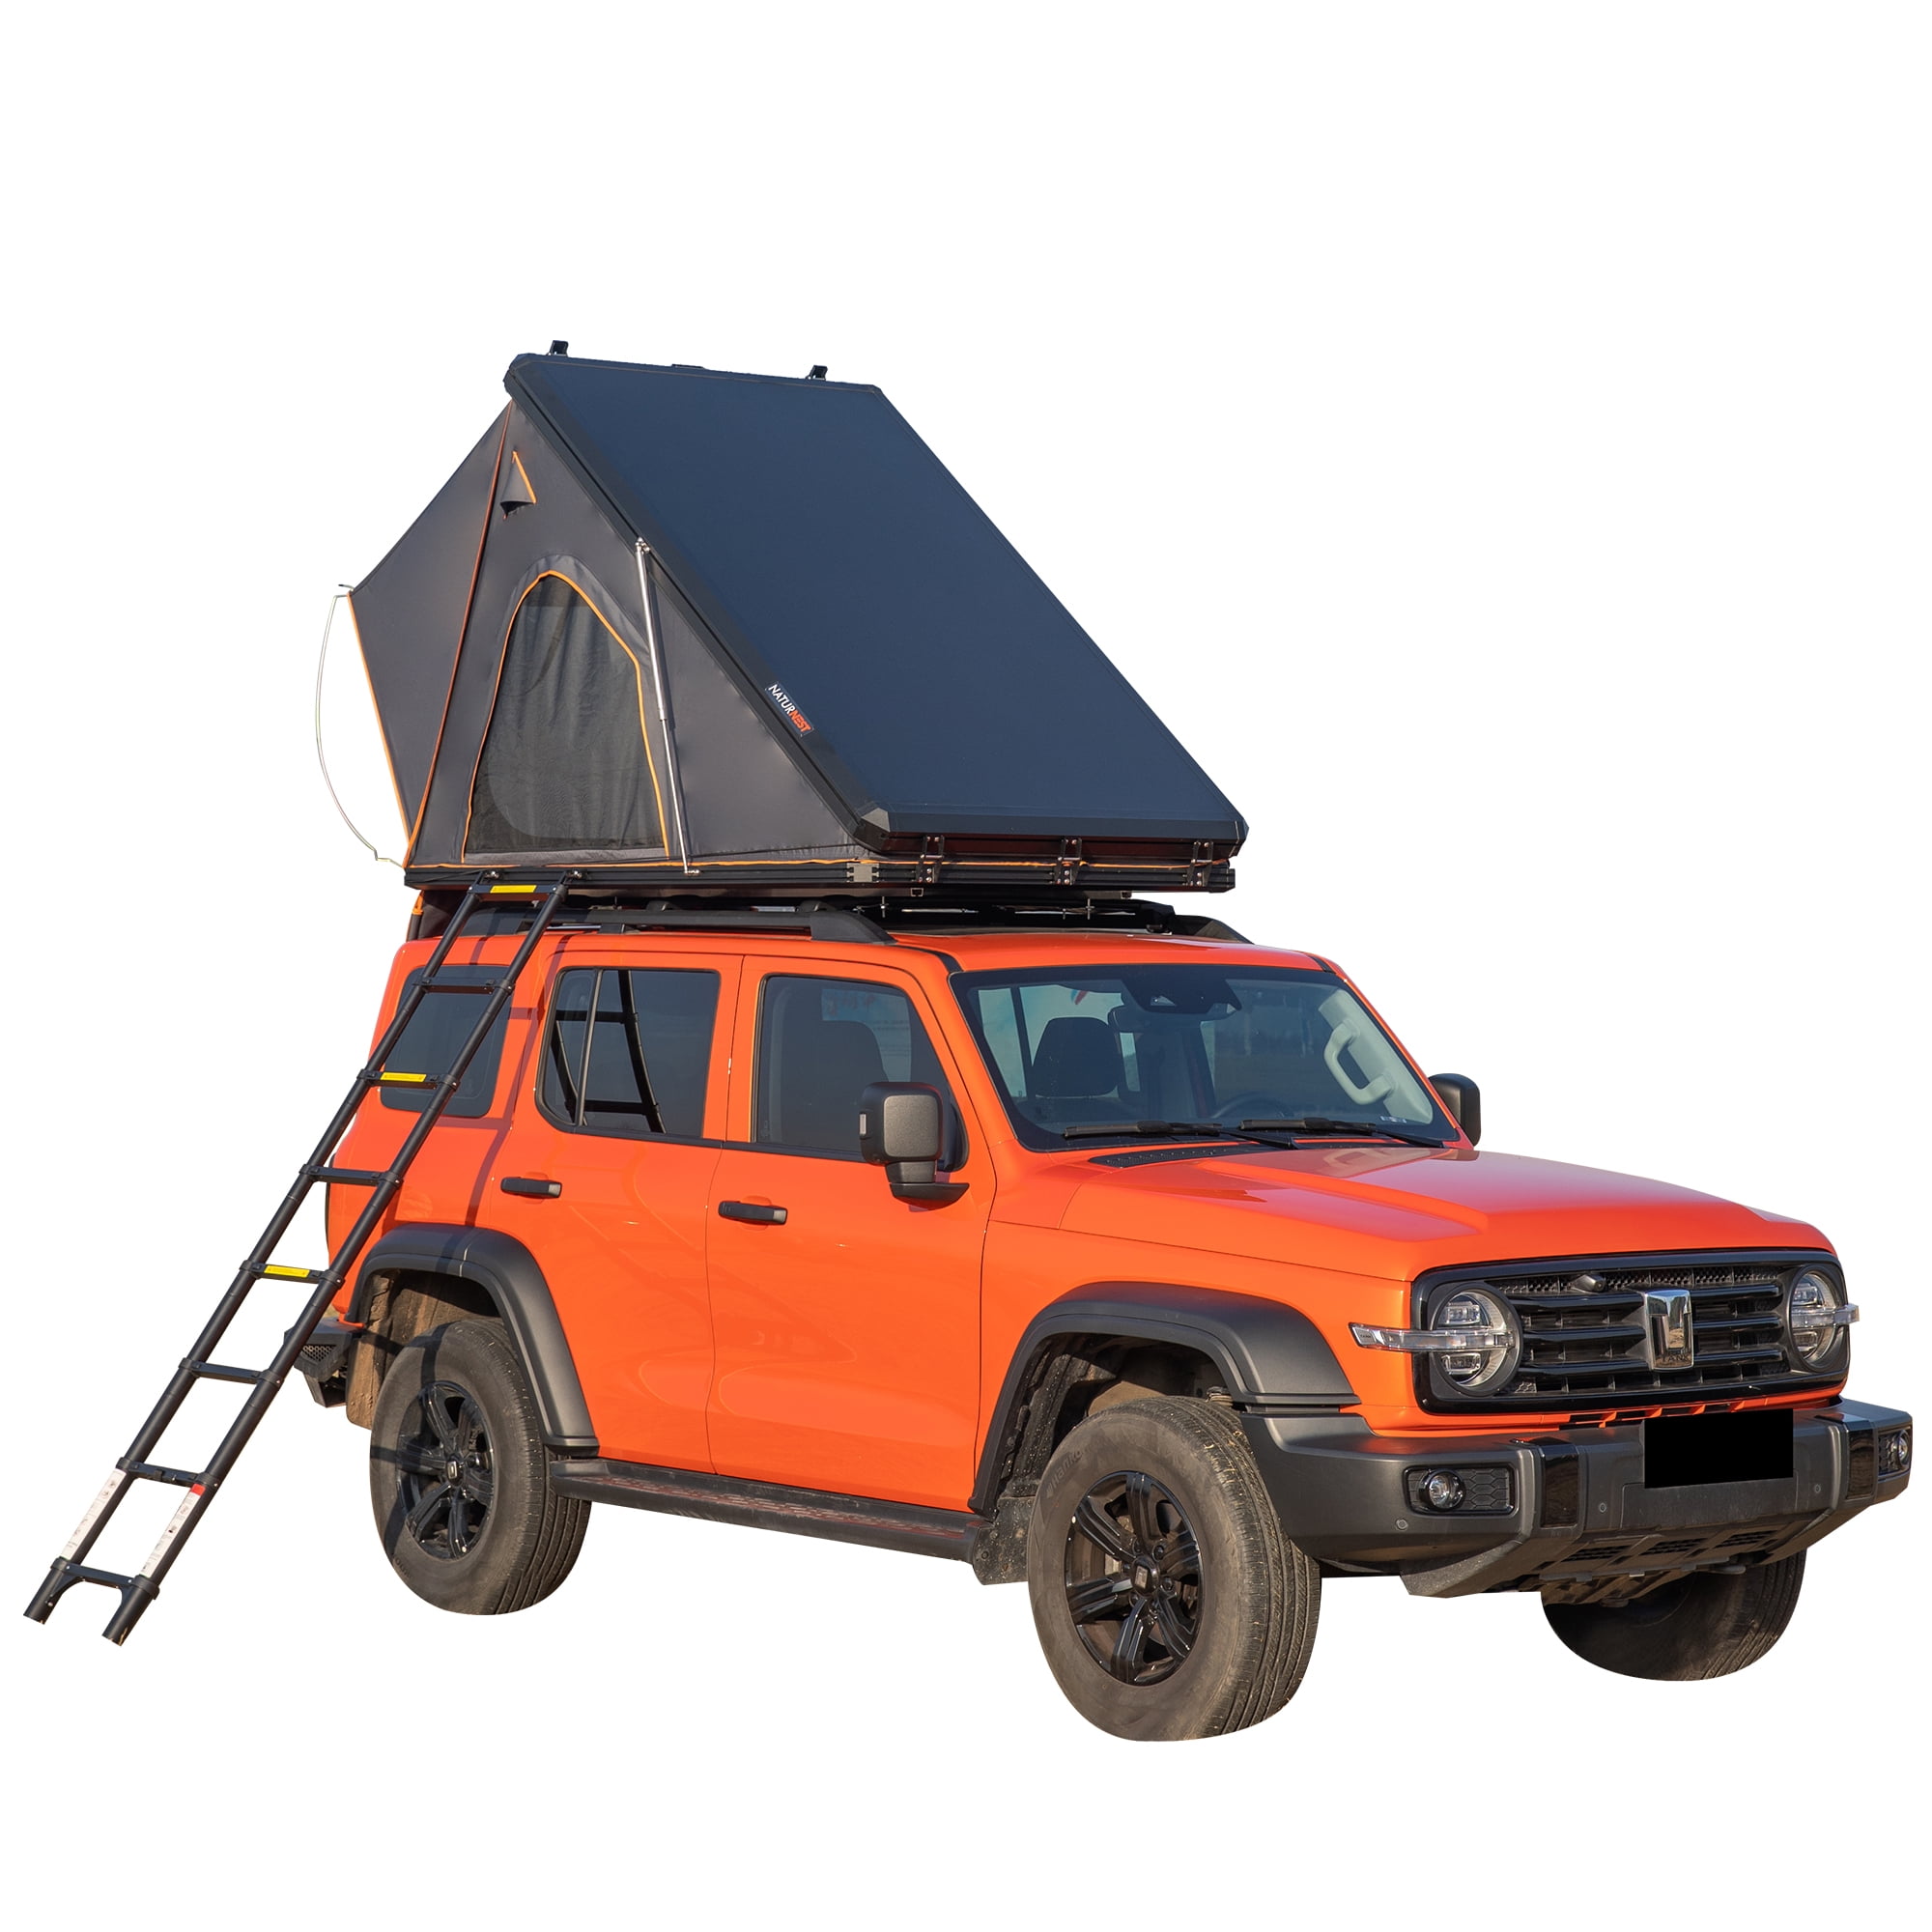  BAMACAR Rooftop Tent Hard Shell, 4 Season Waterproof Rooftop  Tent for Camping, Hardshell Rooftop Tent for Van Jeep SUV Truck Car Tents  for Camping Car Roof Tent Aluminium Pop Up Roof